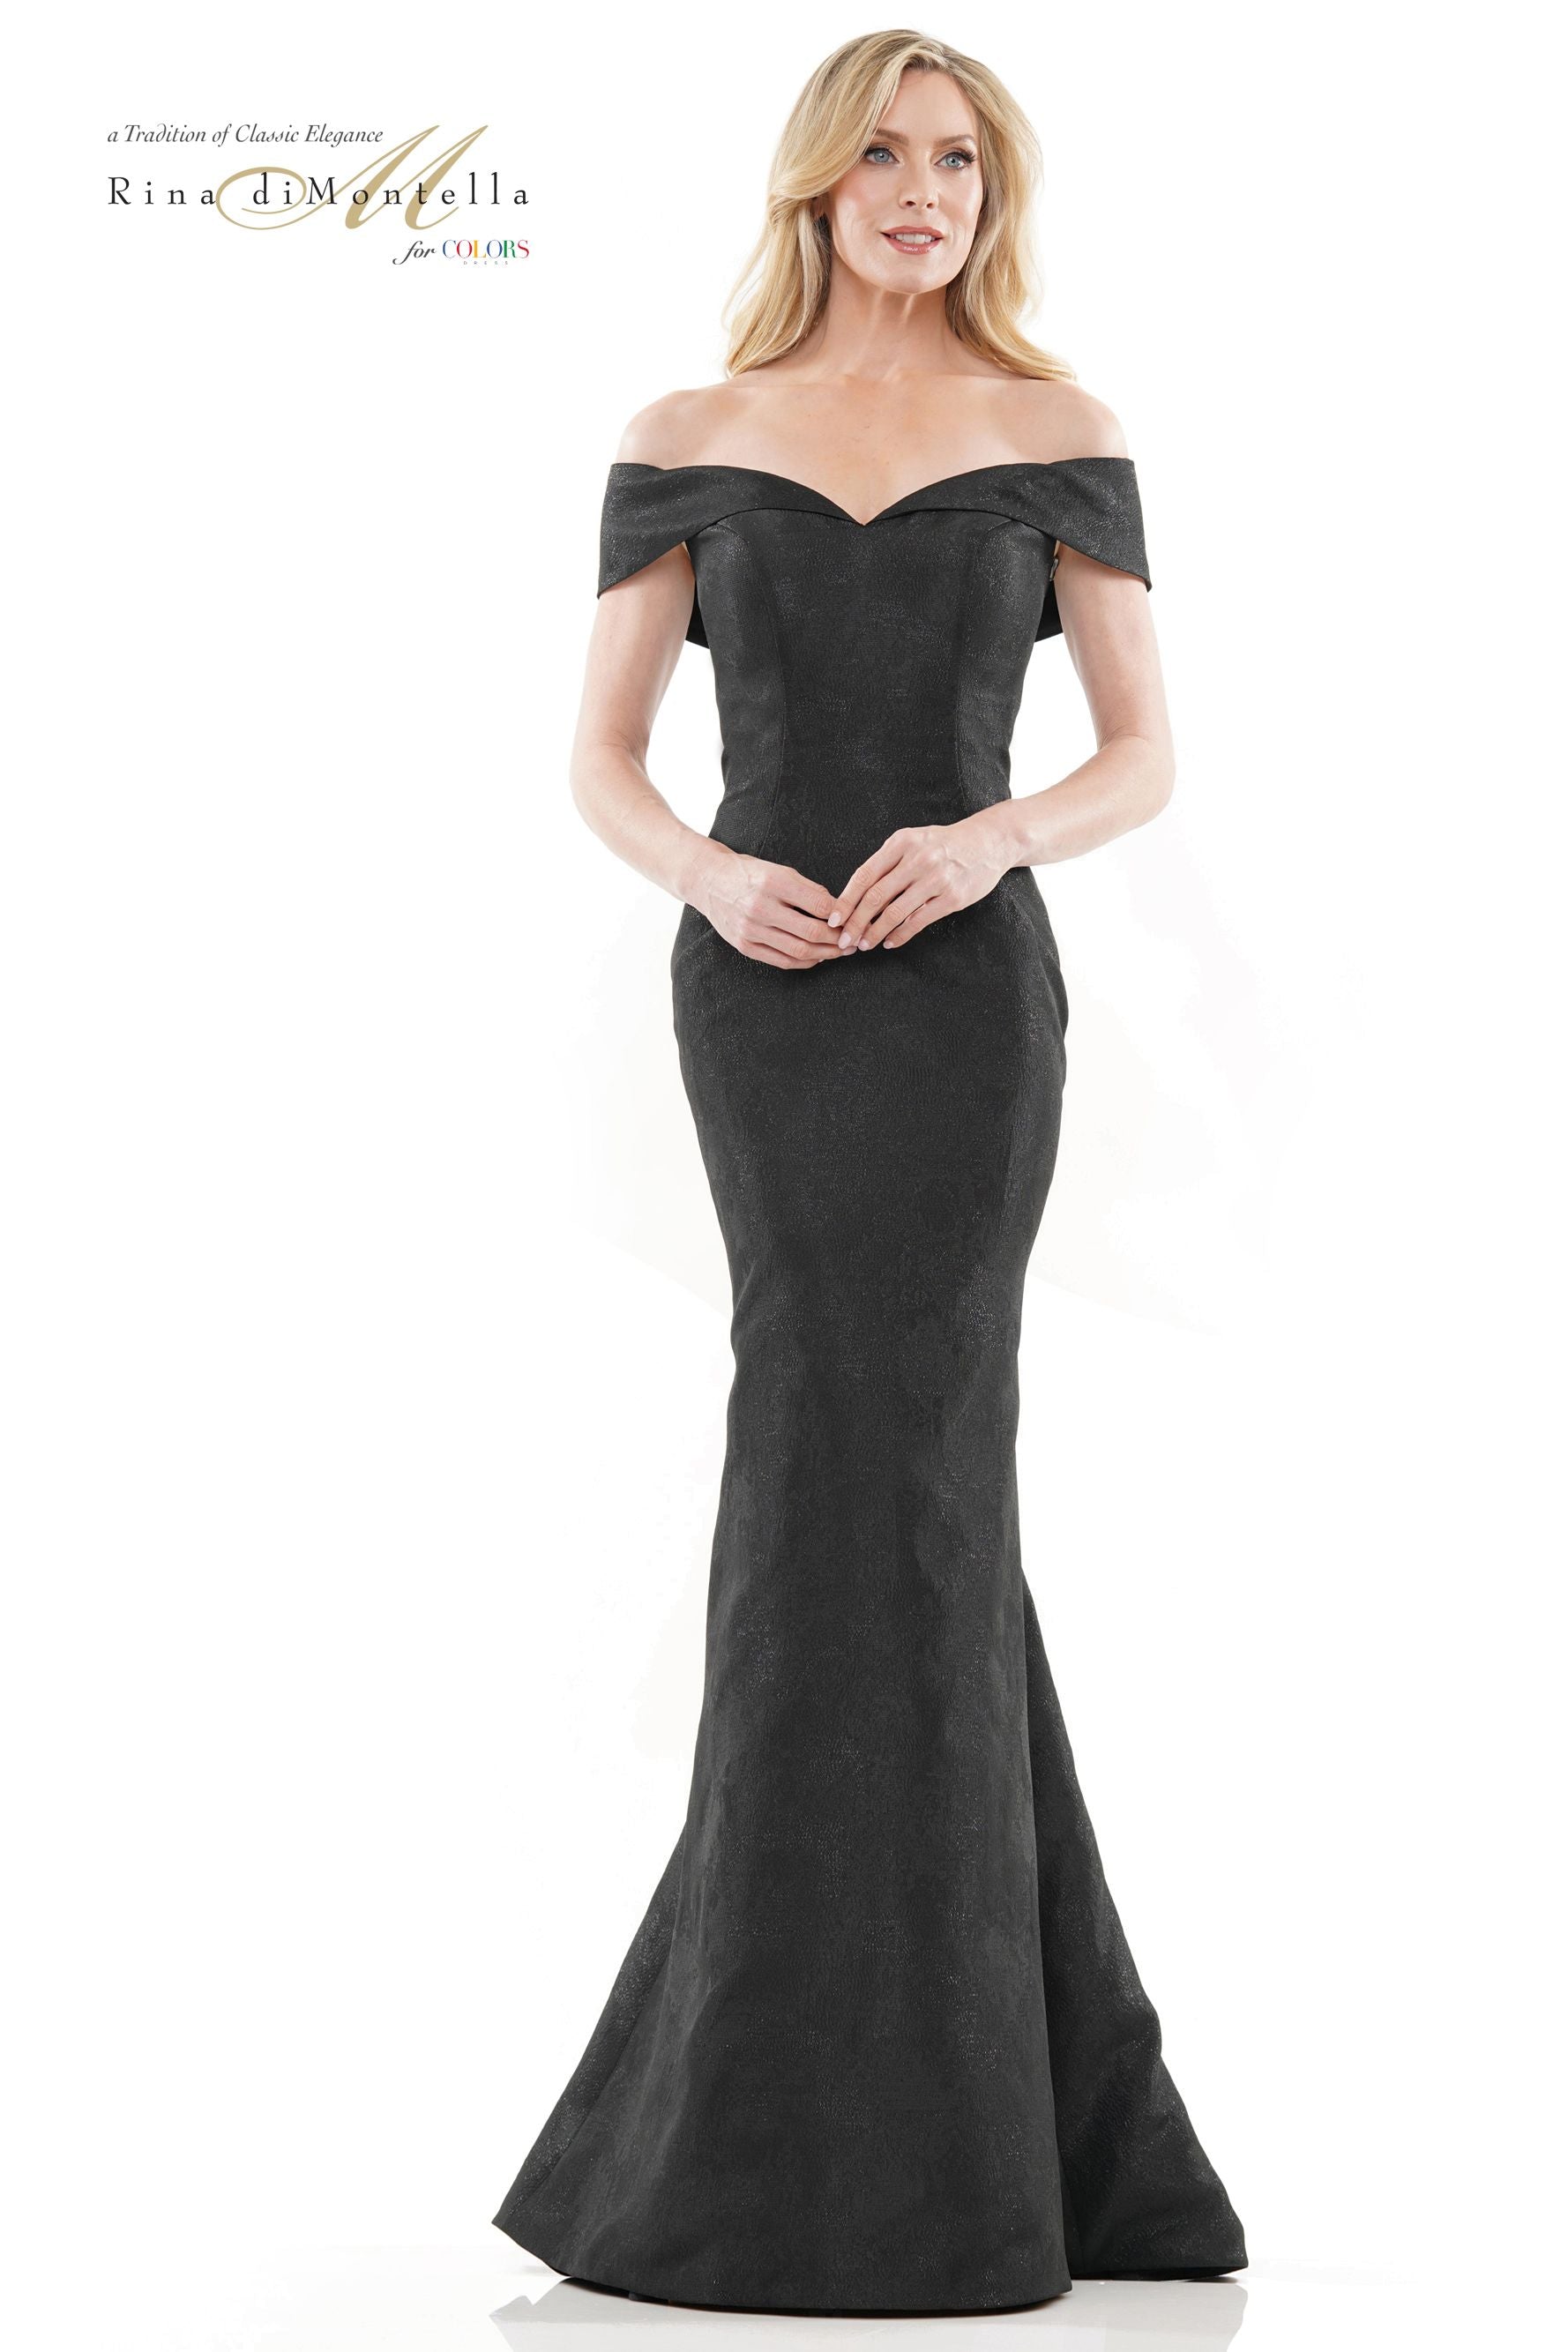 Rina Di Montella Fitted Strapless Off The Shoulder Long Dress -RD2937